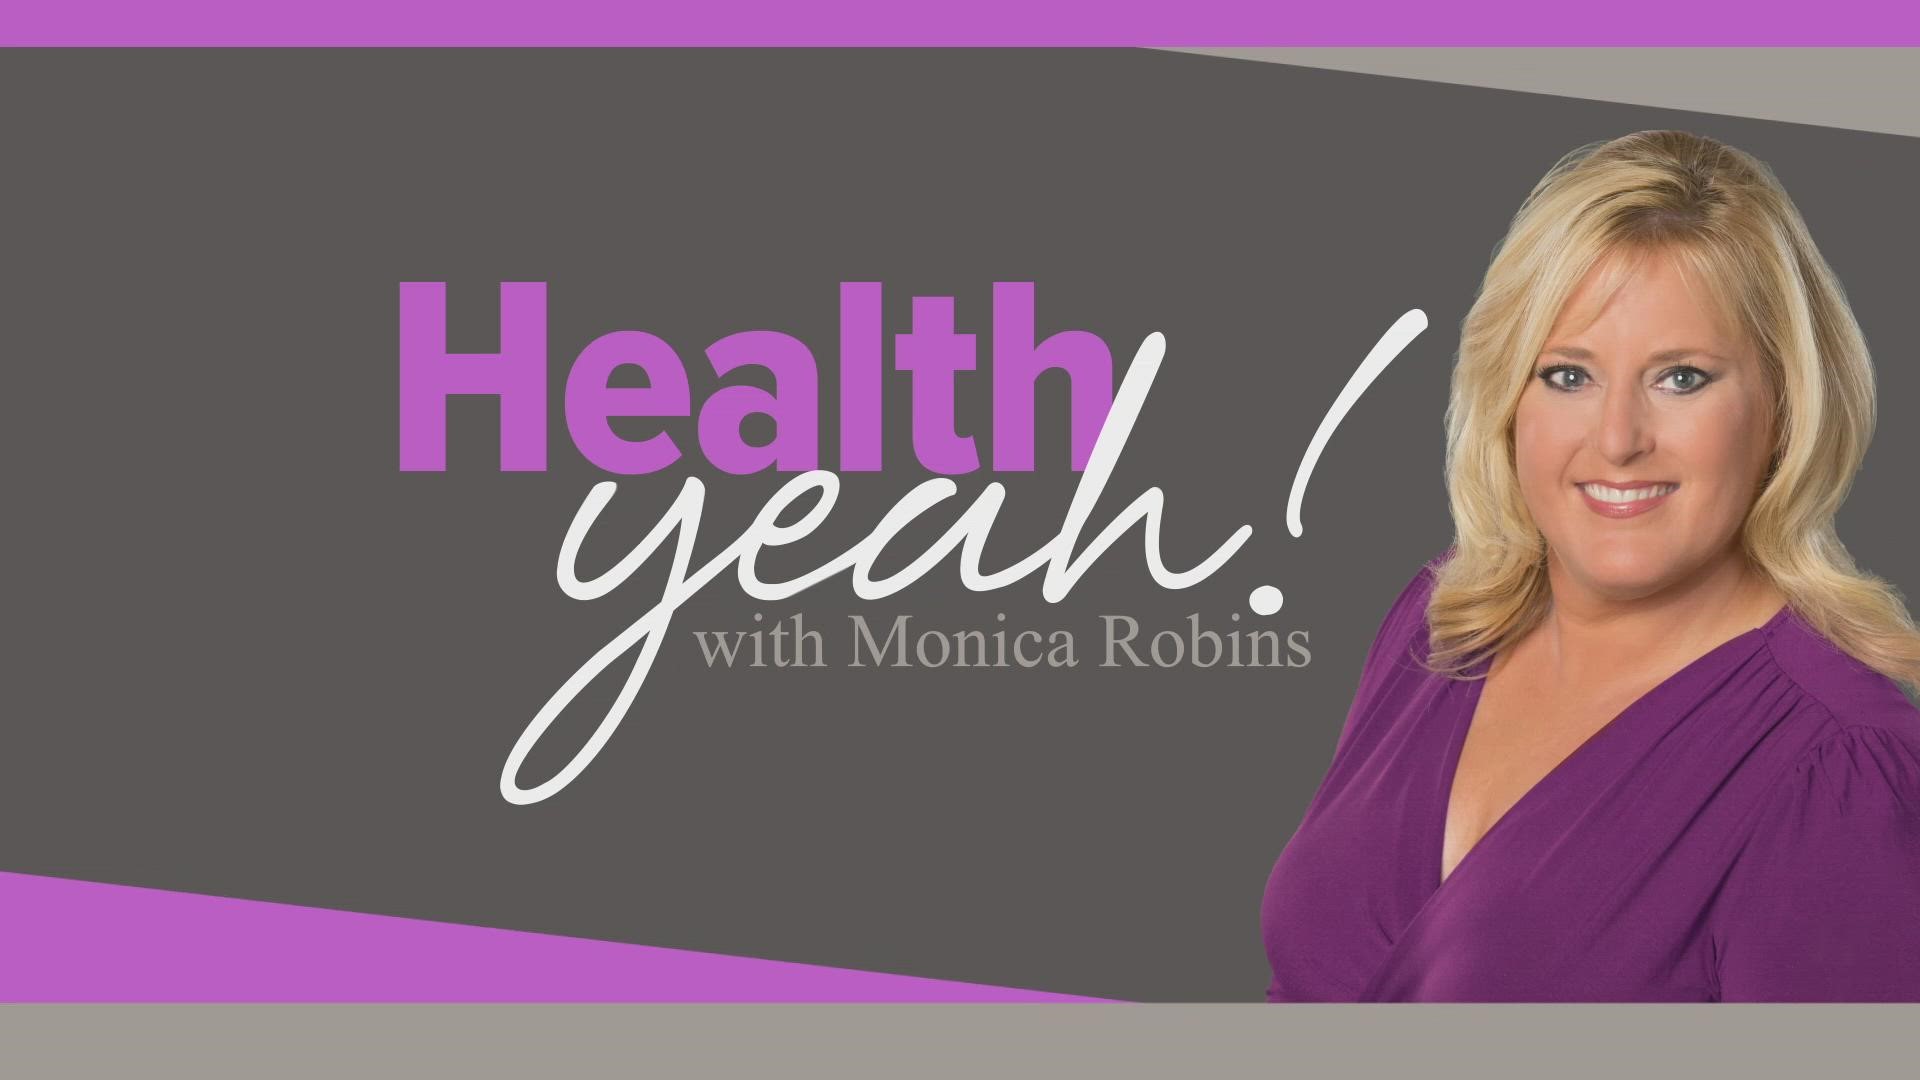 Monica Robins spoke with Dr. Charles Duffy, M.D., Ph.D. Director of the Brain Health & Memory Center within the University Hospitals Neurological Institute.